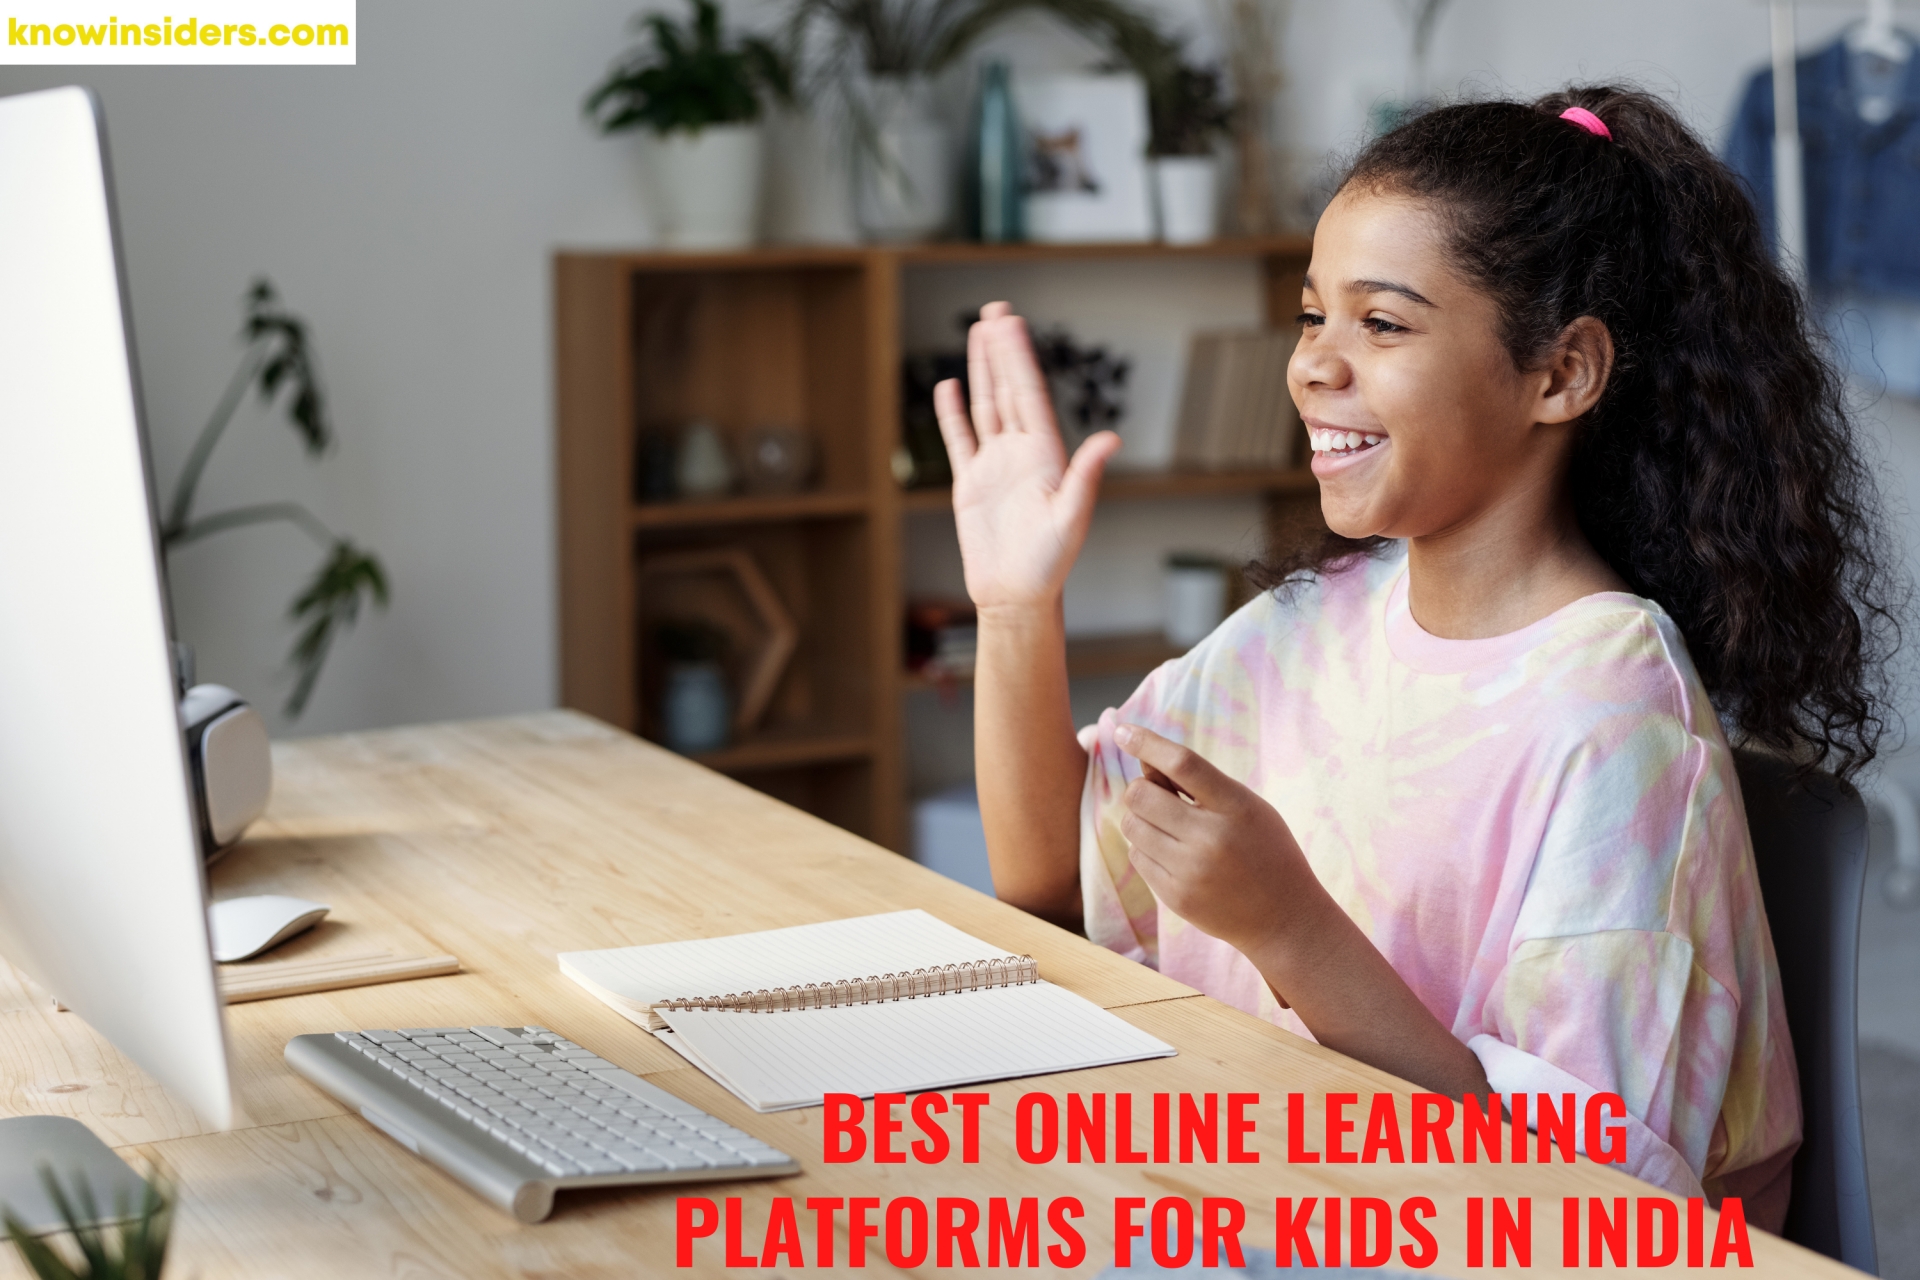 10 Best Online Learning Platforms For Kids in India